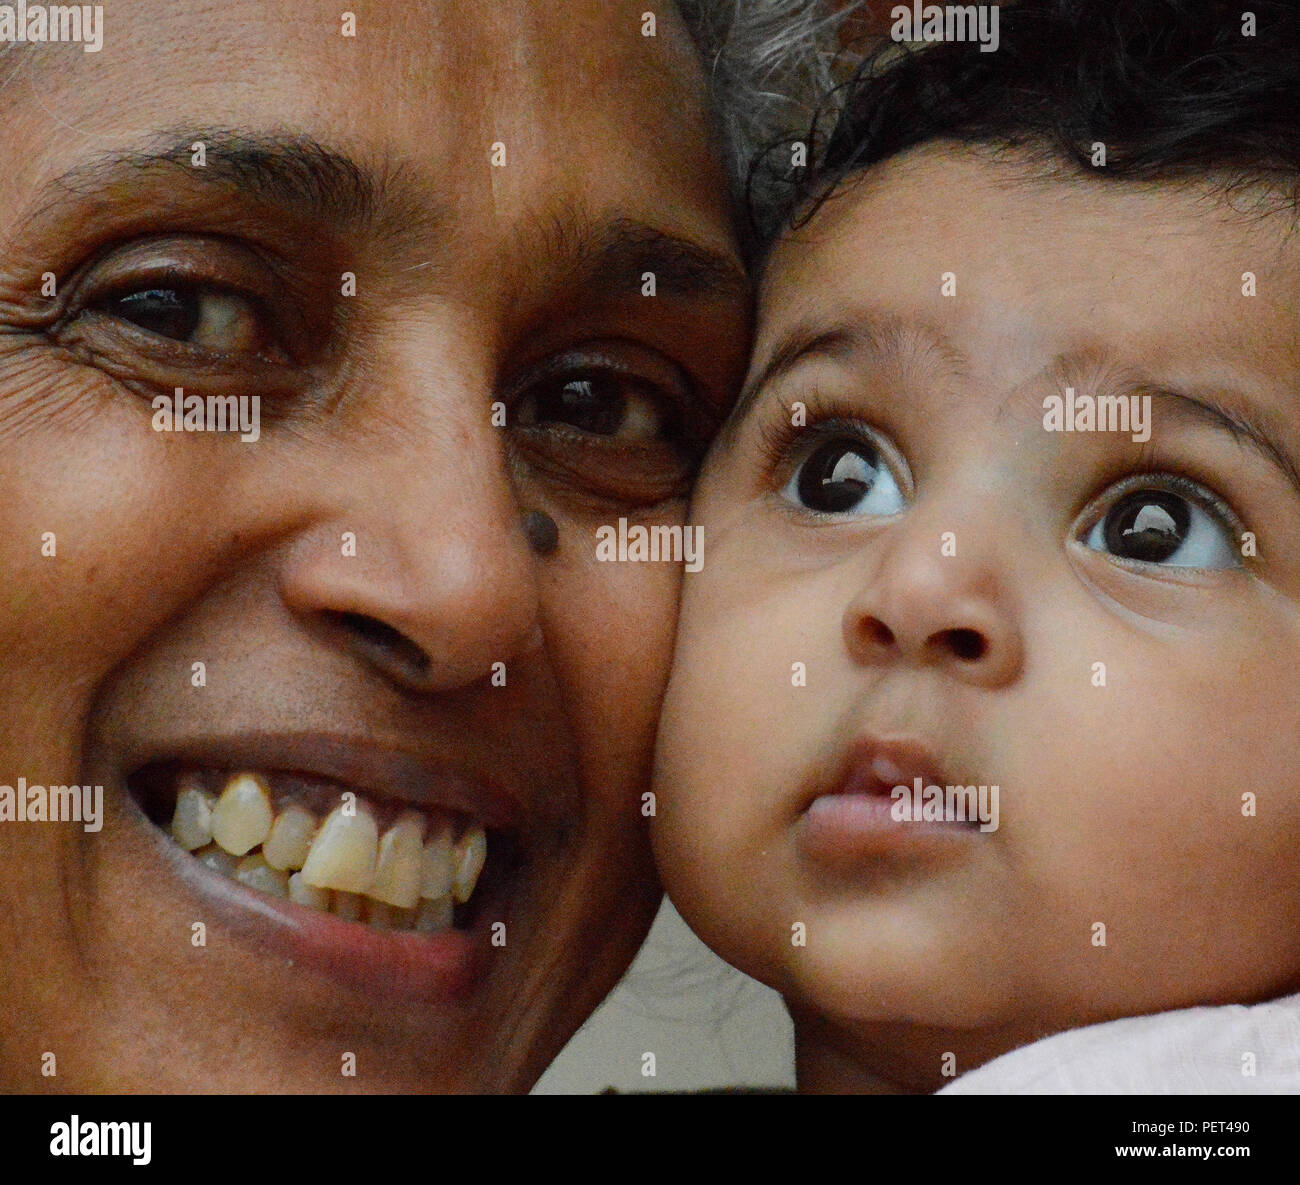 Close up of a granny with big broad smile hugging and holding her sweet princess tightly close to her face. Stock Photo